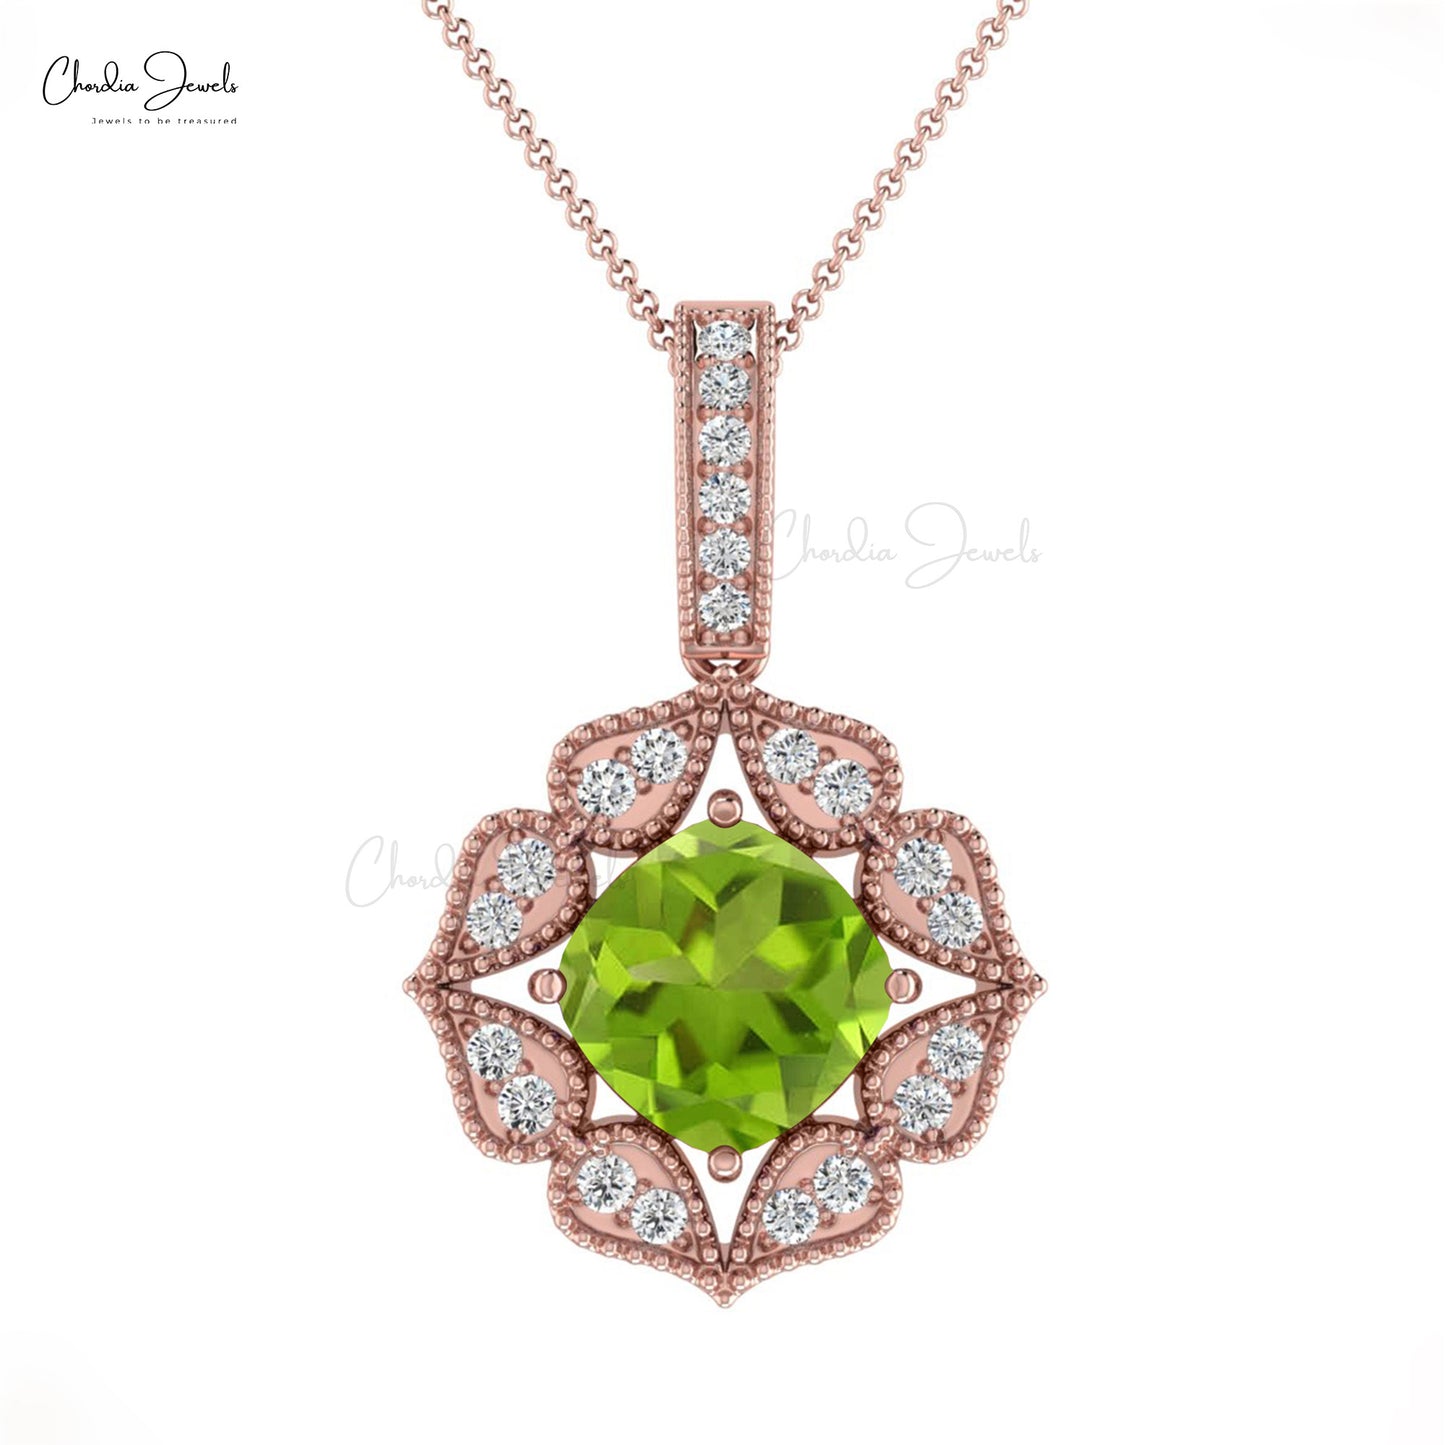 Load image into Gallery viewer, Newly Designer Natural Green Peridot Pendant Necklace Round Shape Genuine White Diamond Art Deco Pendant Necklace in 14k Pure Gold Gift For Her
